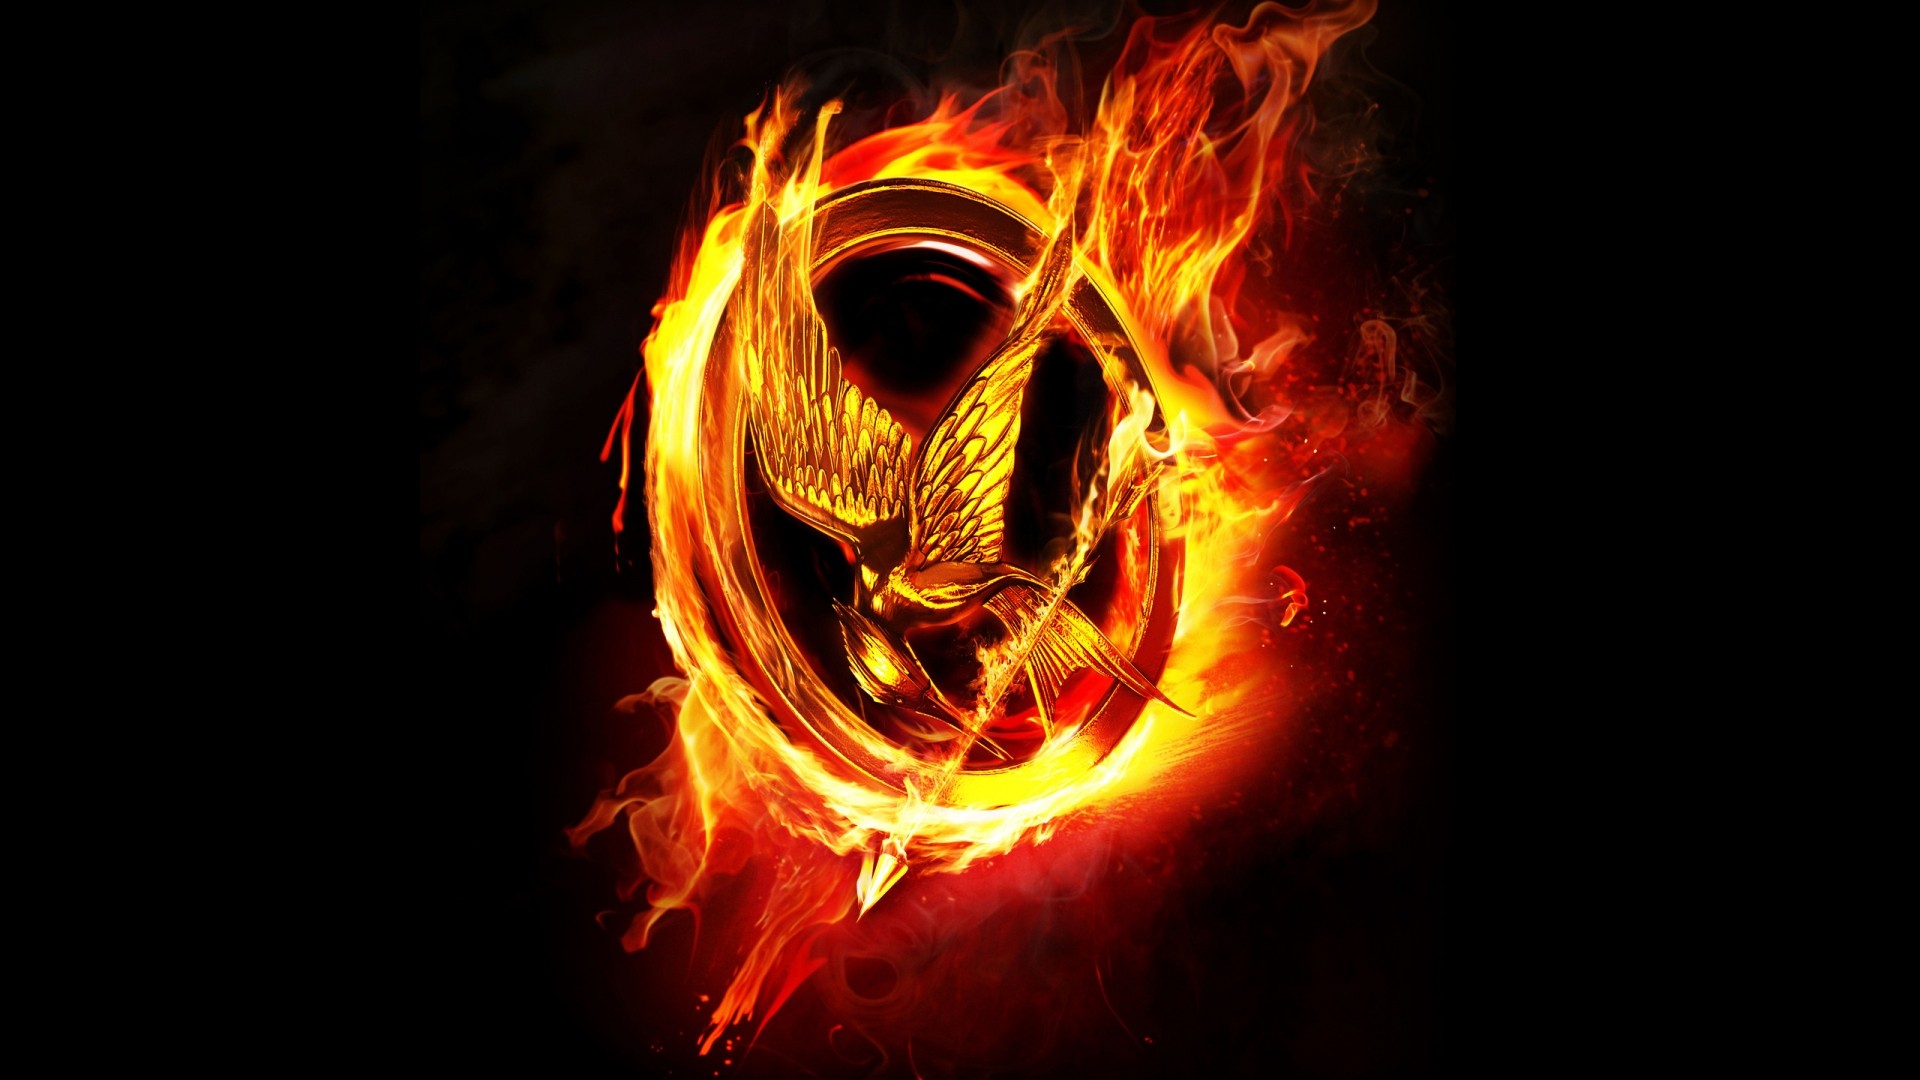 Black Fire Flame Mockingjay The Hunger Games 1920x1080